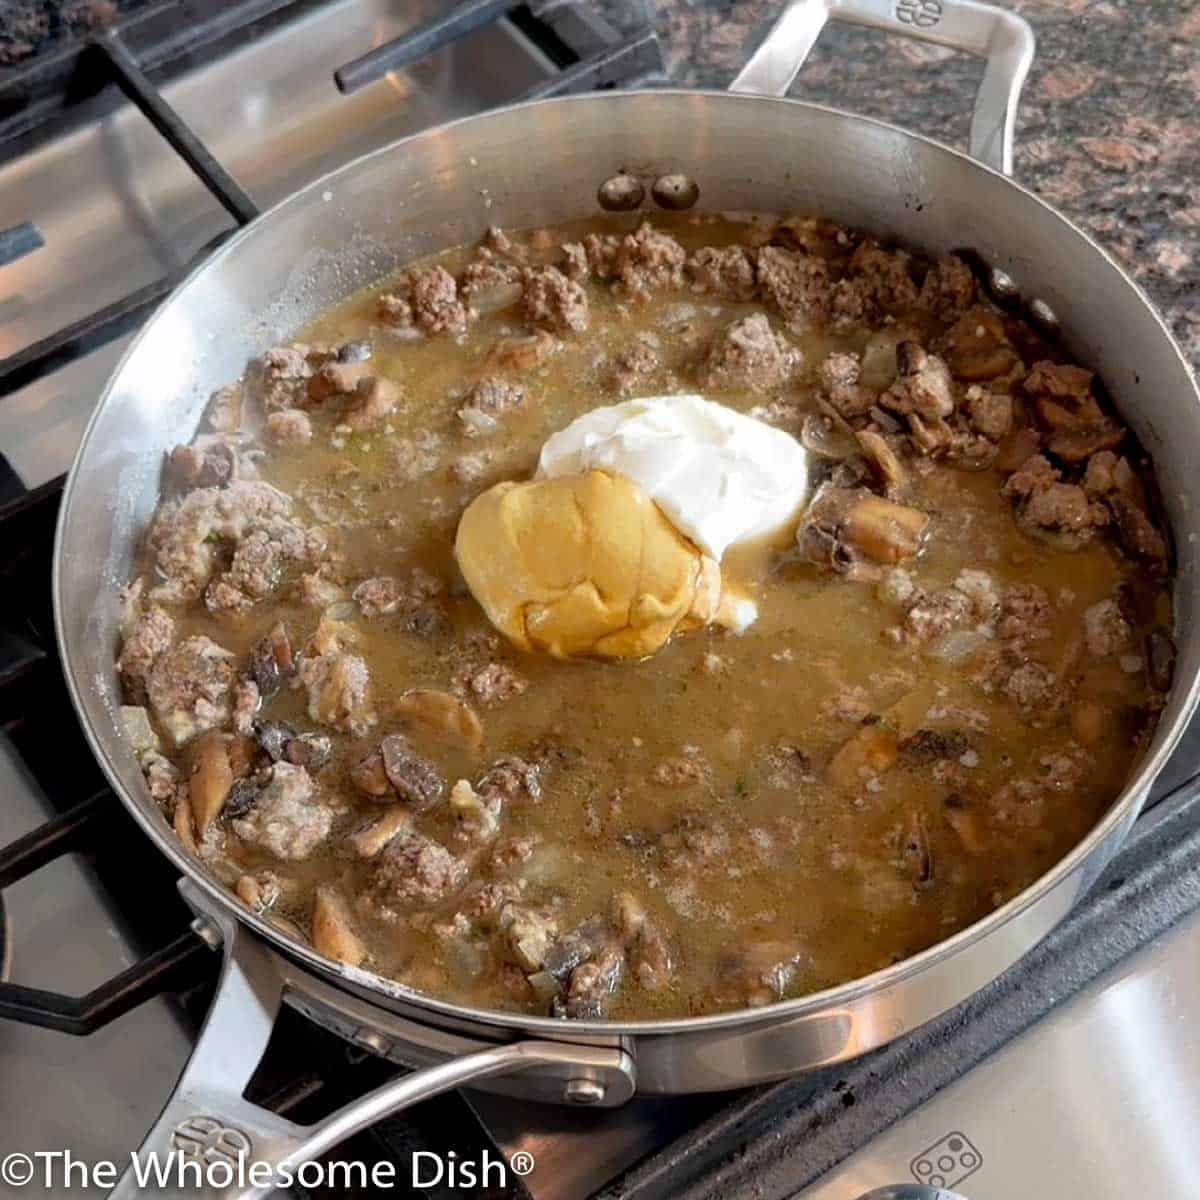 Beef broth, sour cream, Dijon mustard, and Worchestershire sauce added to the skillet.